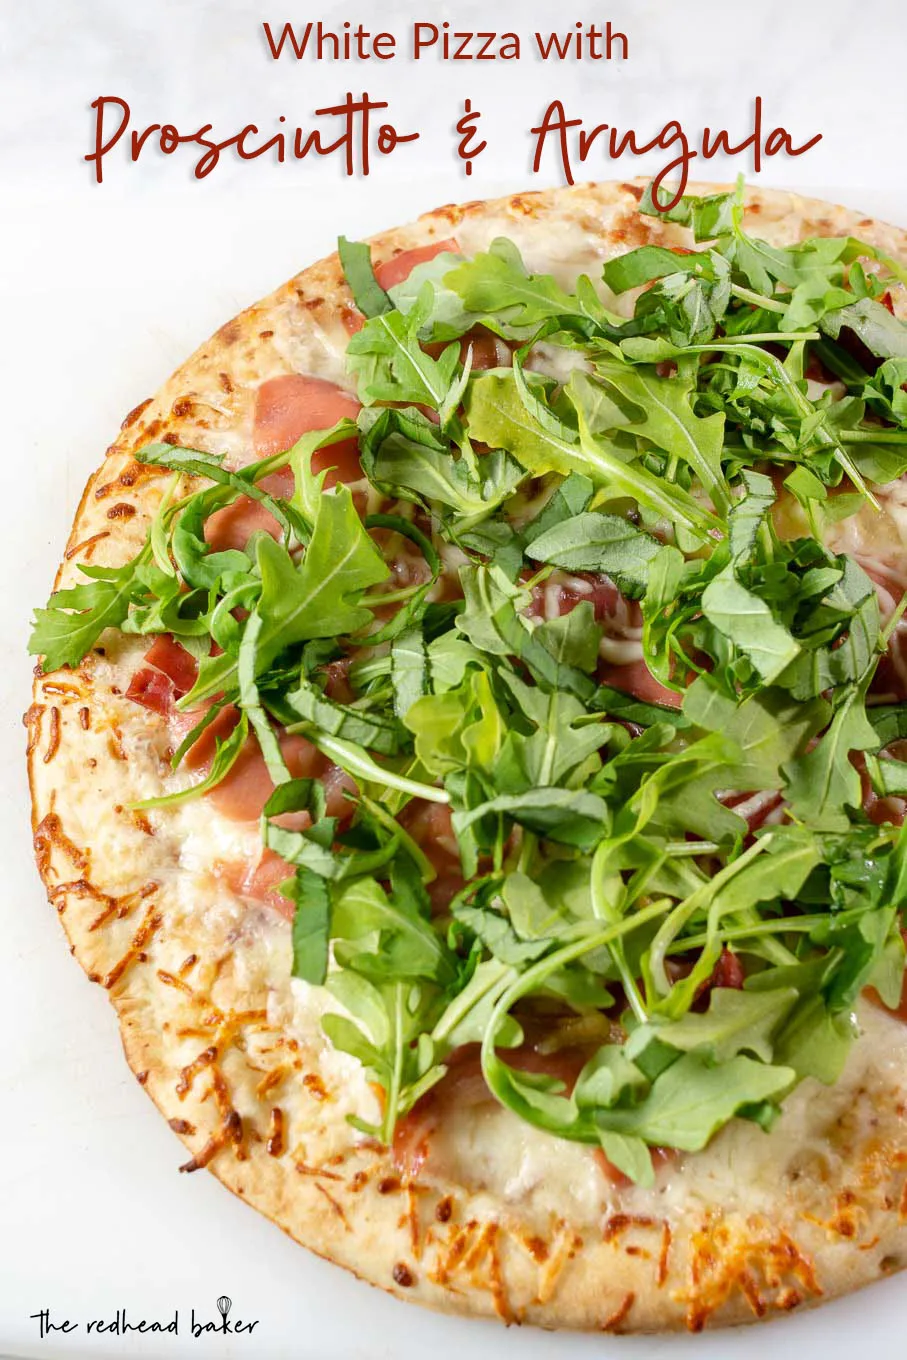 An overhead photo of a whole white pizza with prosciutto and arugula